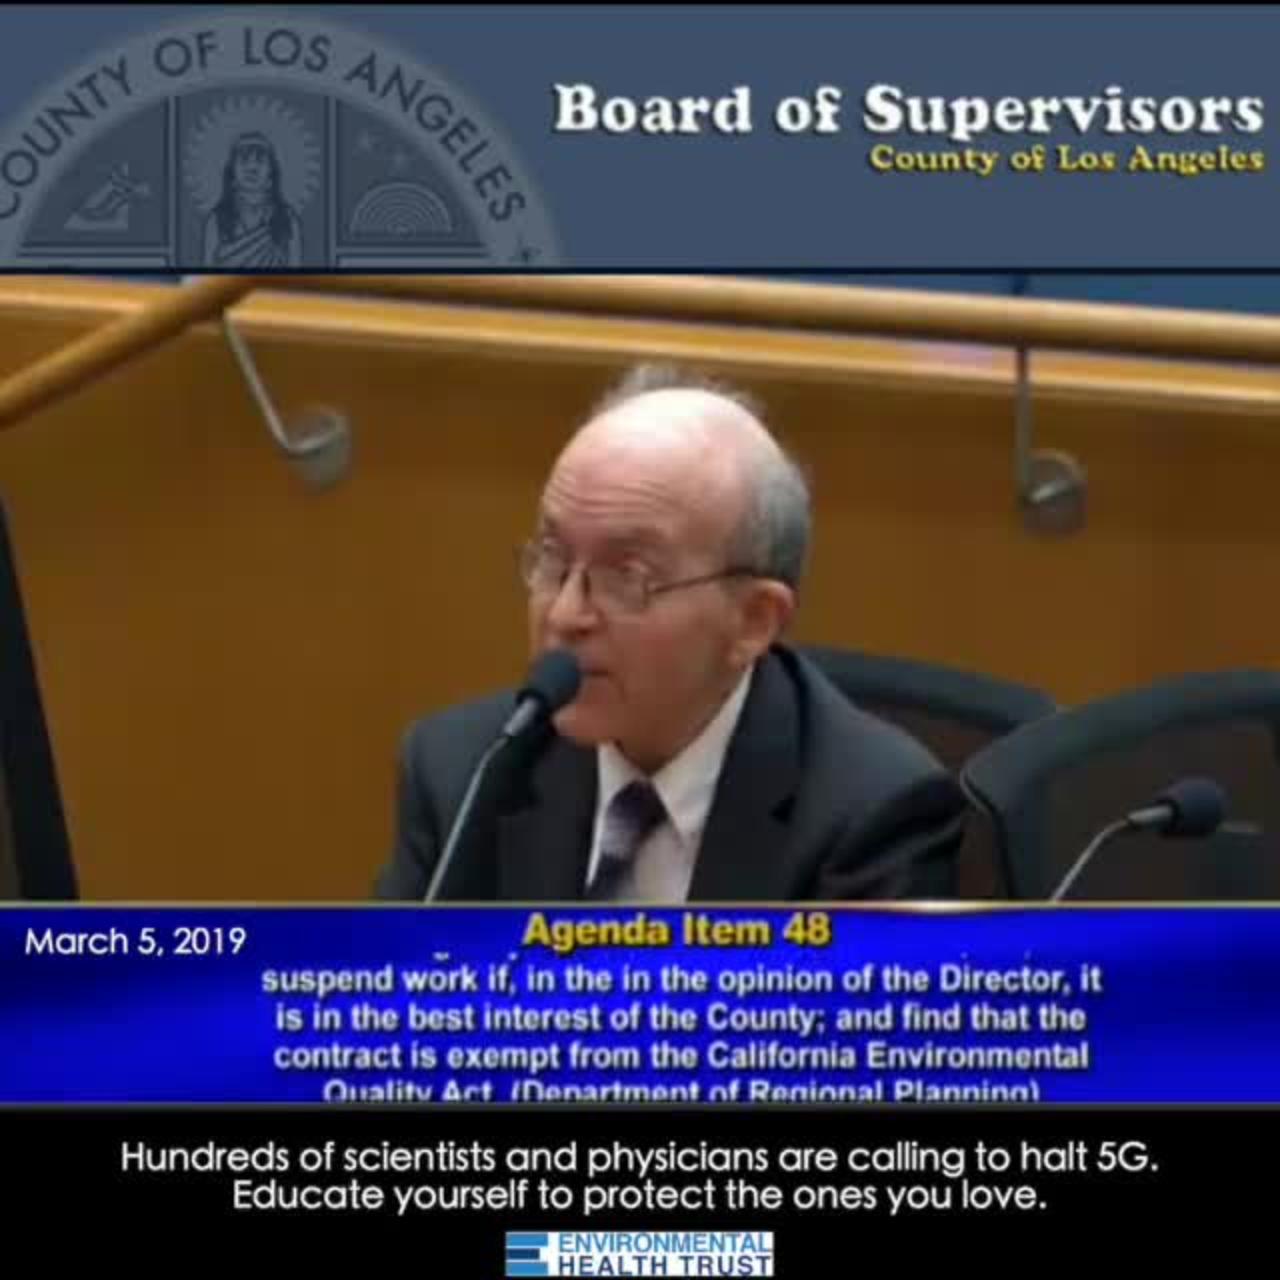 Grandfather speaks on #5G and 4G cell tower proliferation and the need for protections